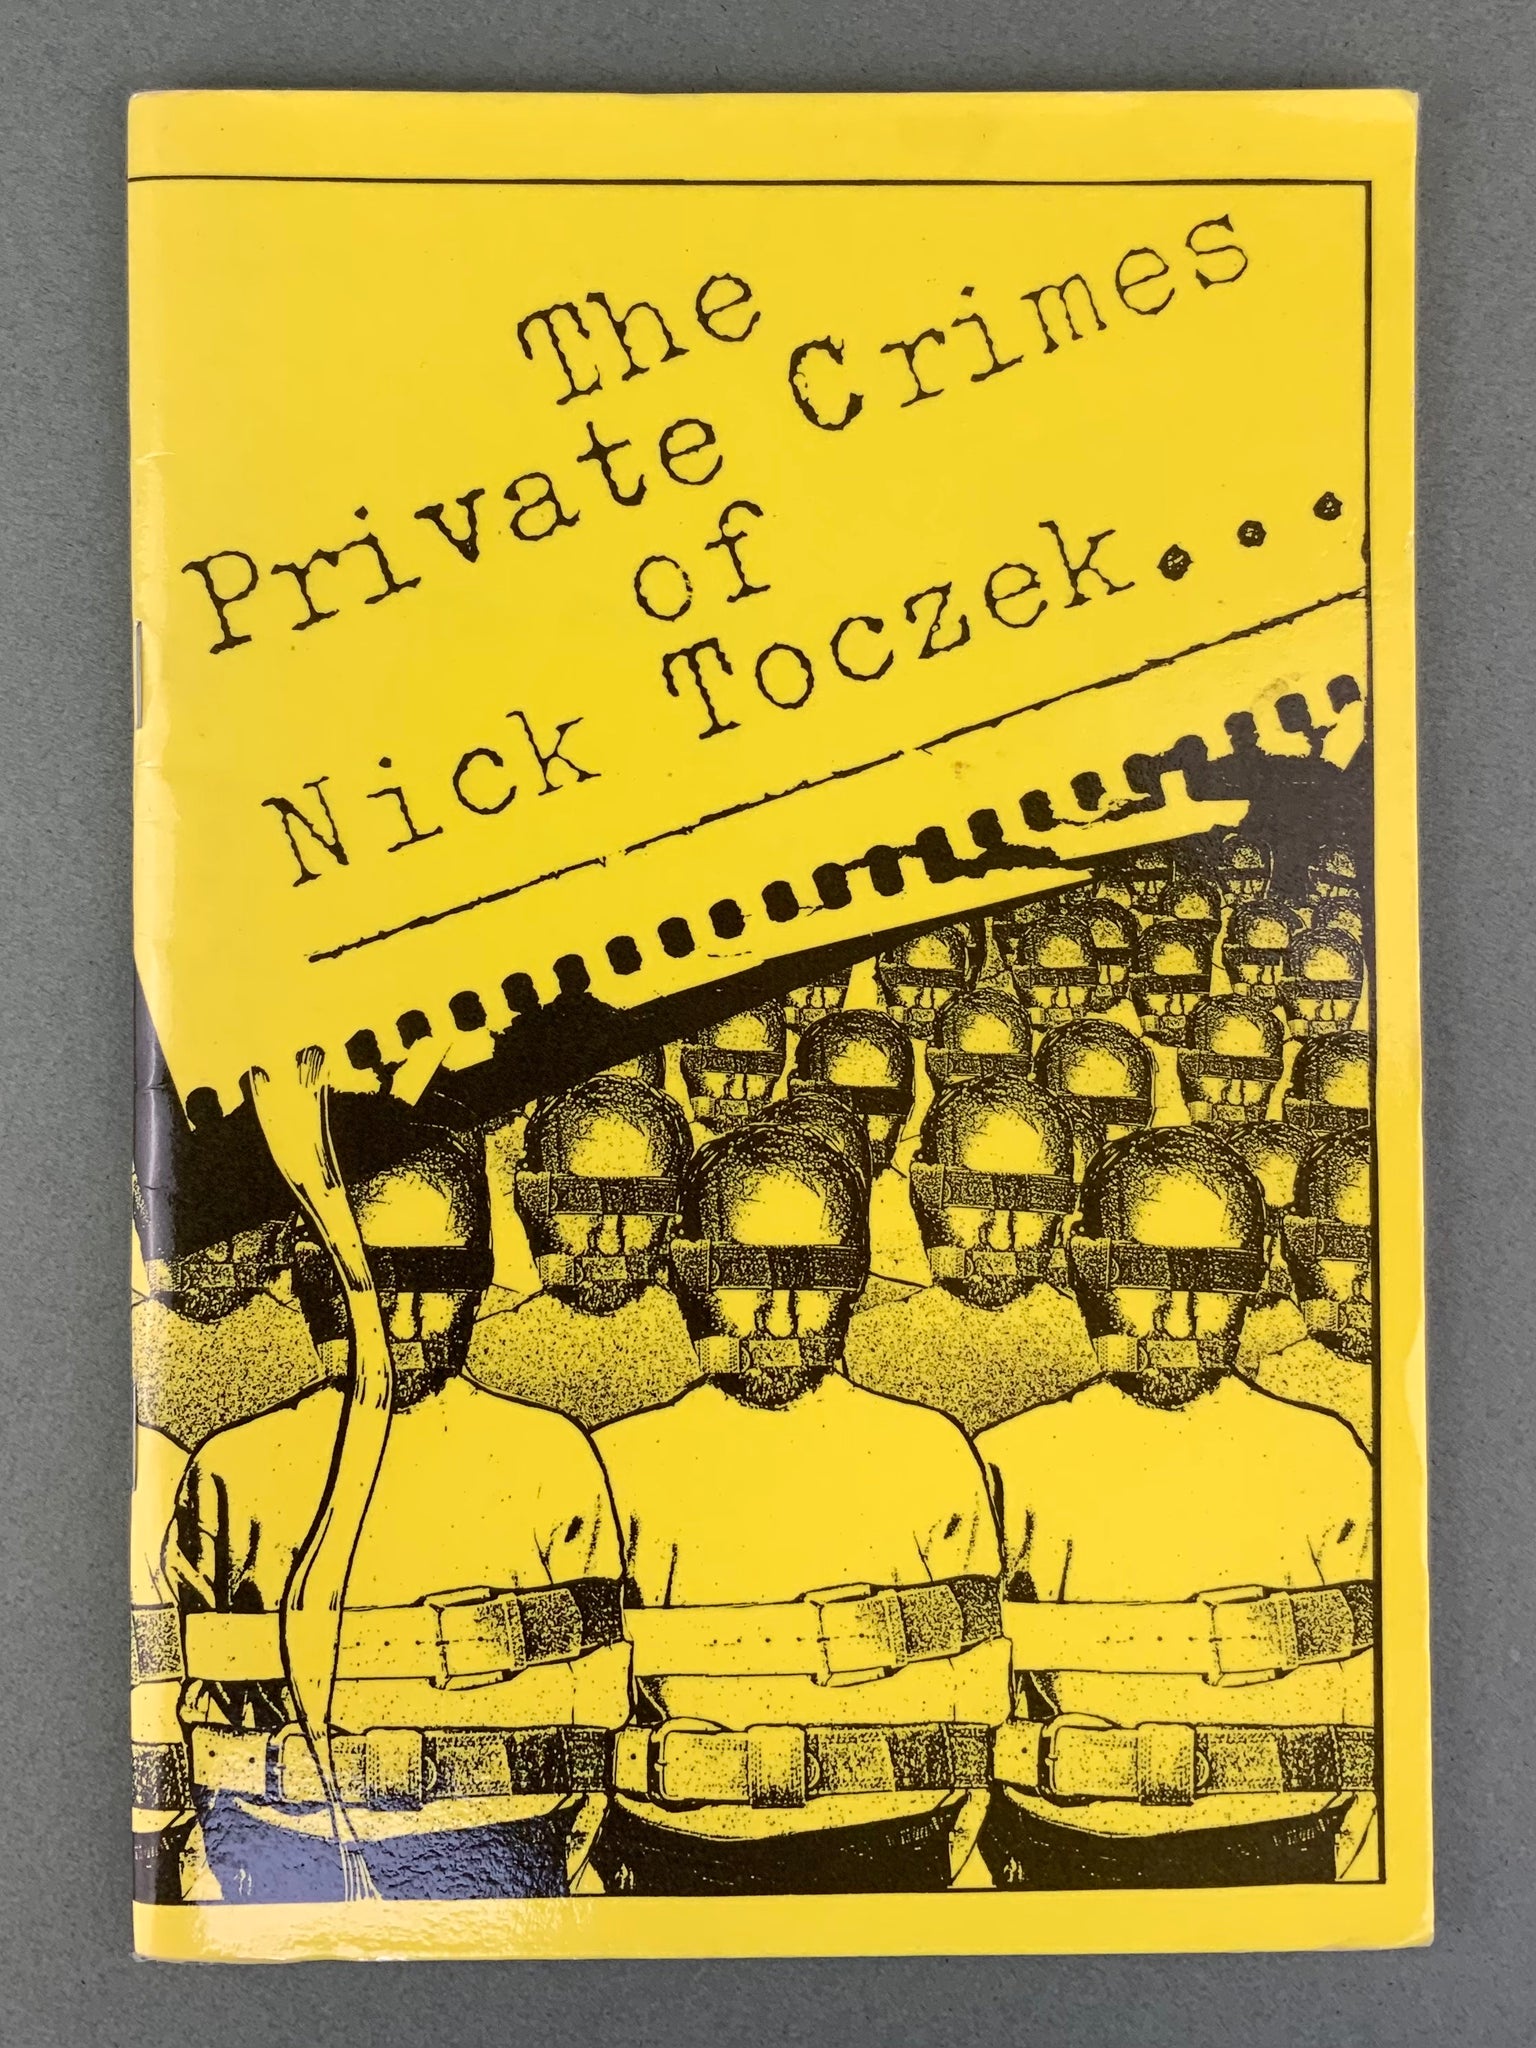 The Private Crimes of Nick Toczek